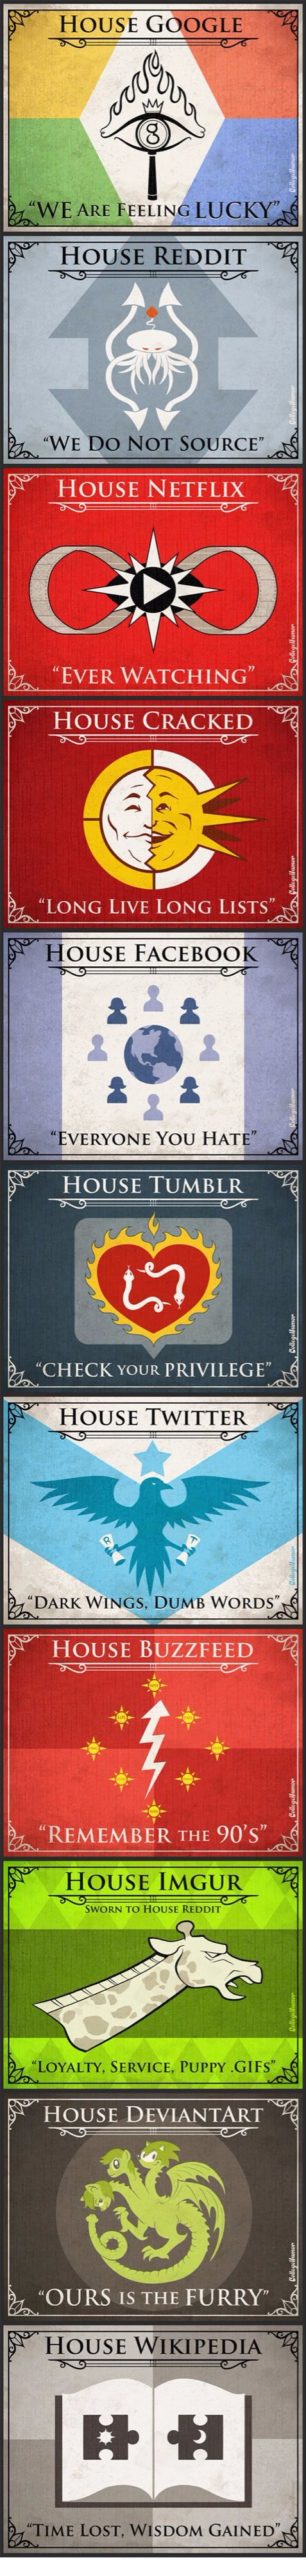 If+Popular+Websites+Were+Game+of+Thrones+Houses